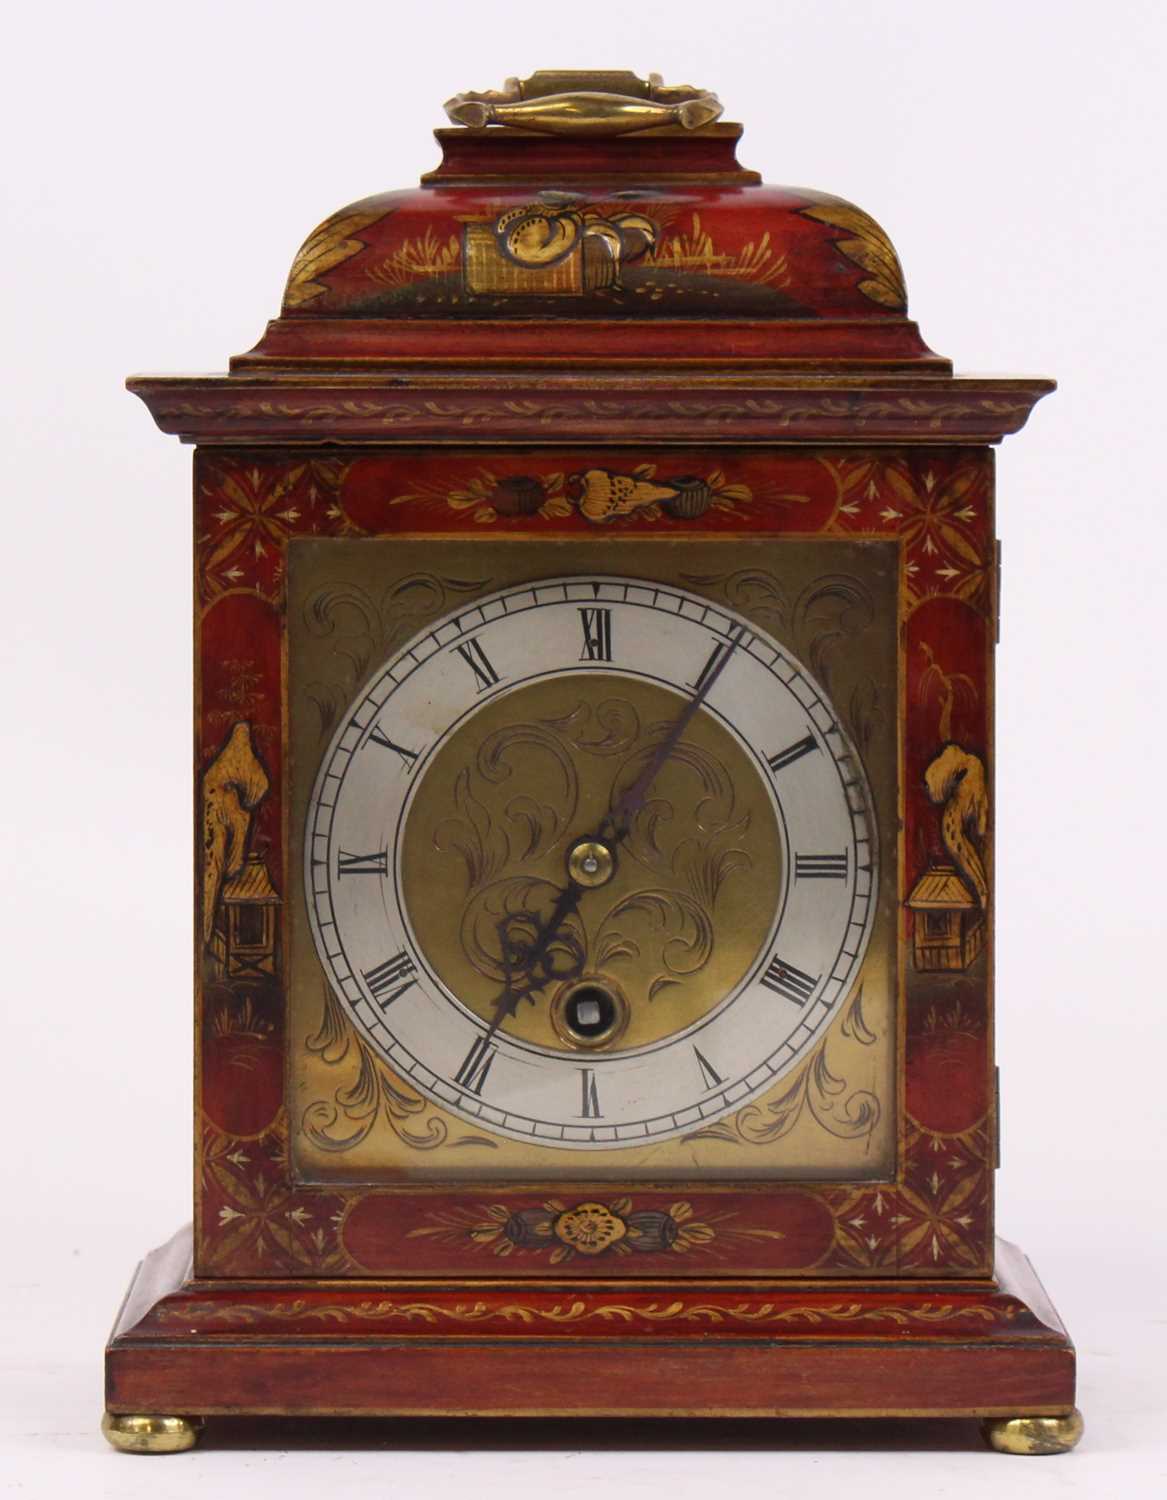 An 18th century style red lacquered cased bracket clock, the silvered chapter ring showing Roman